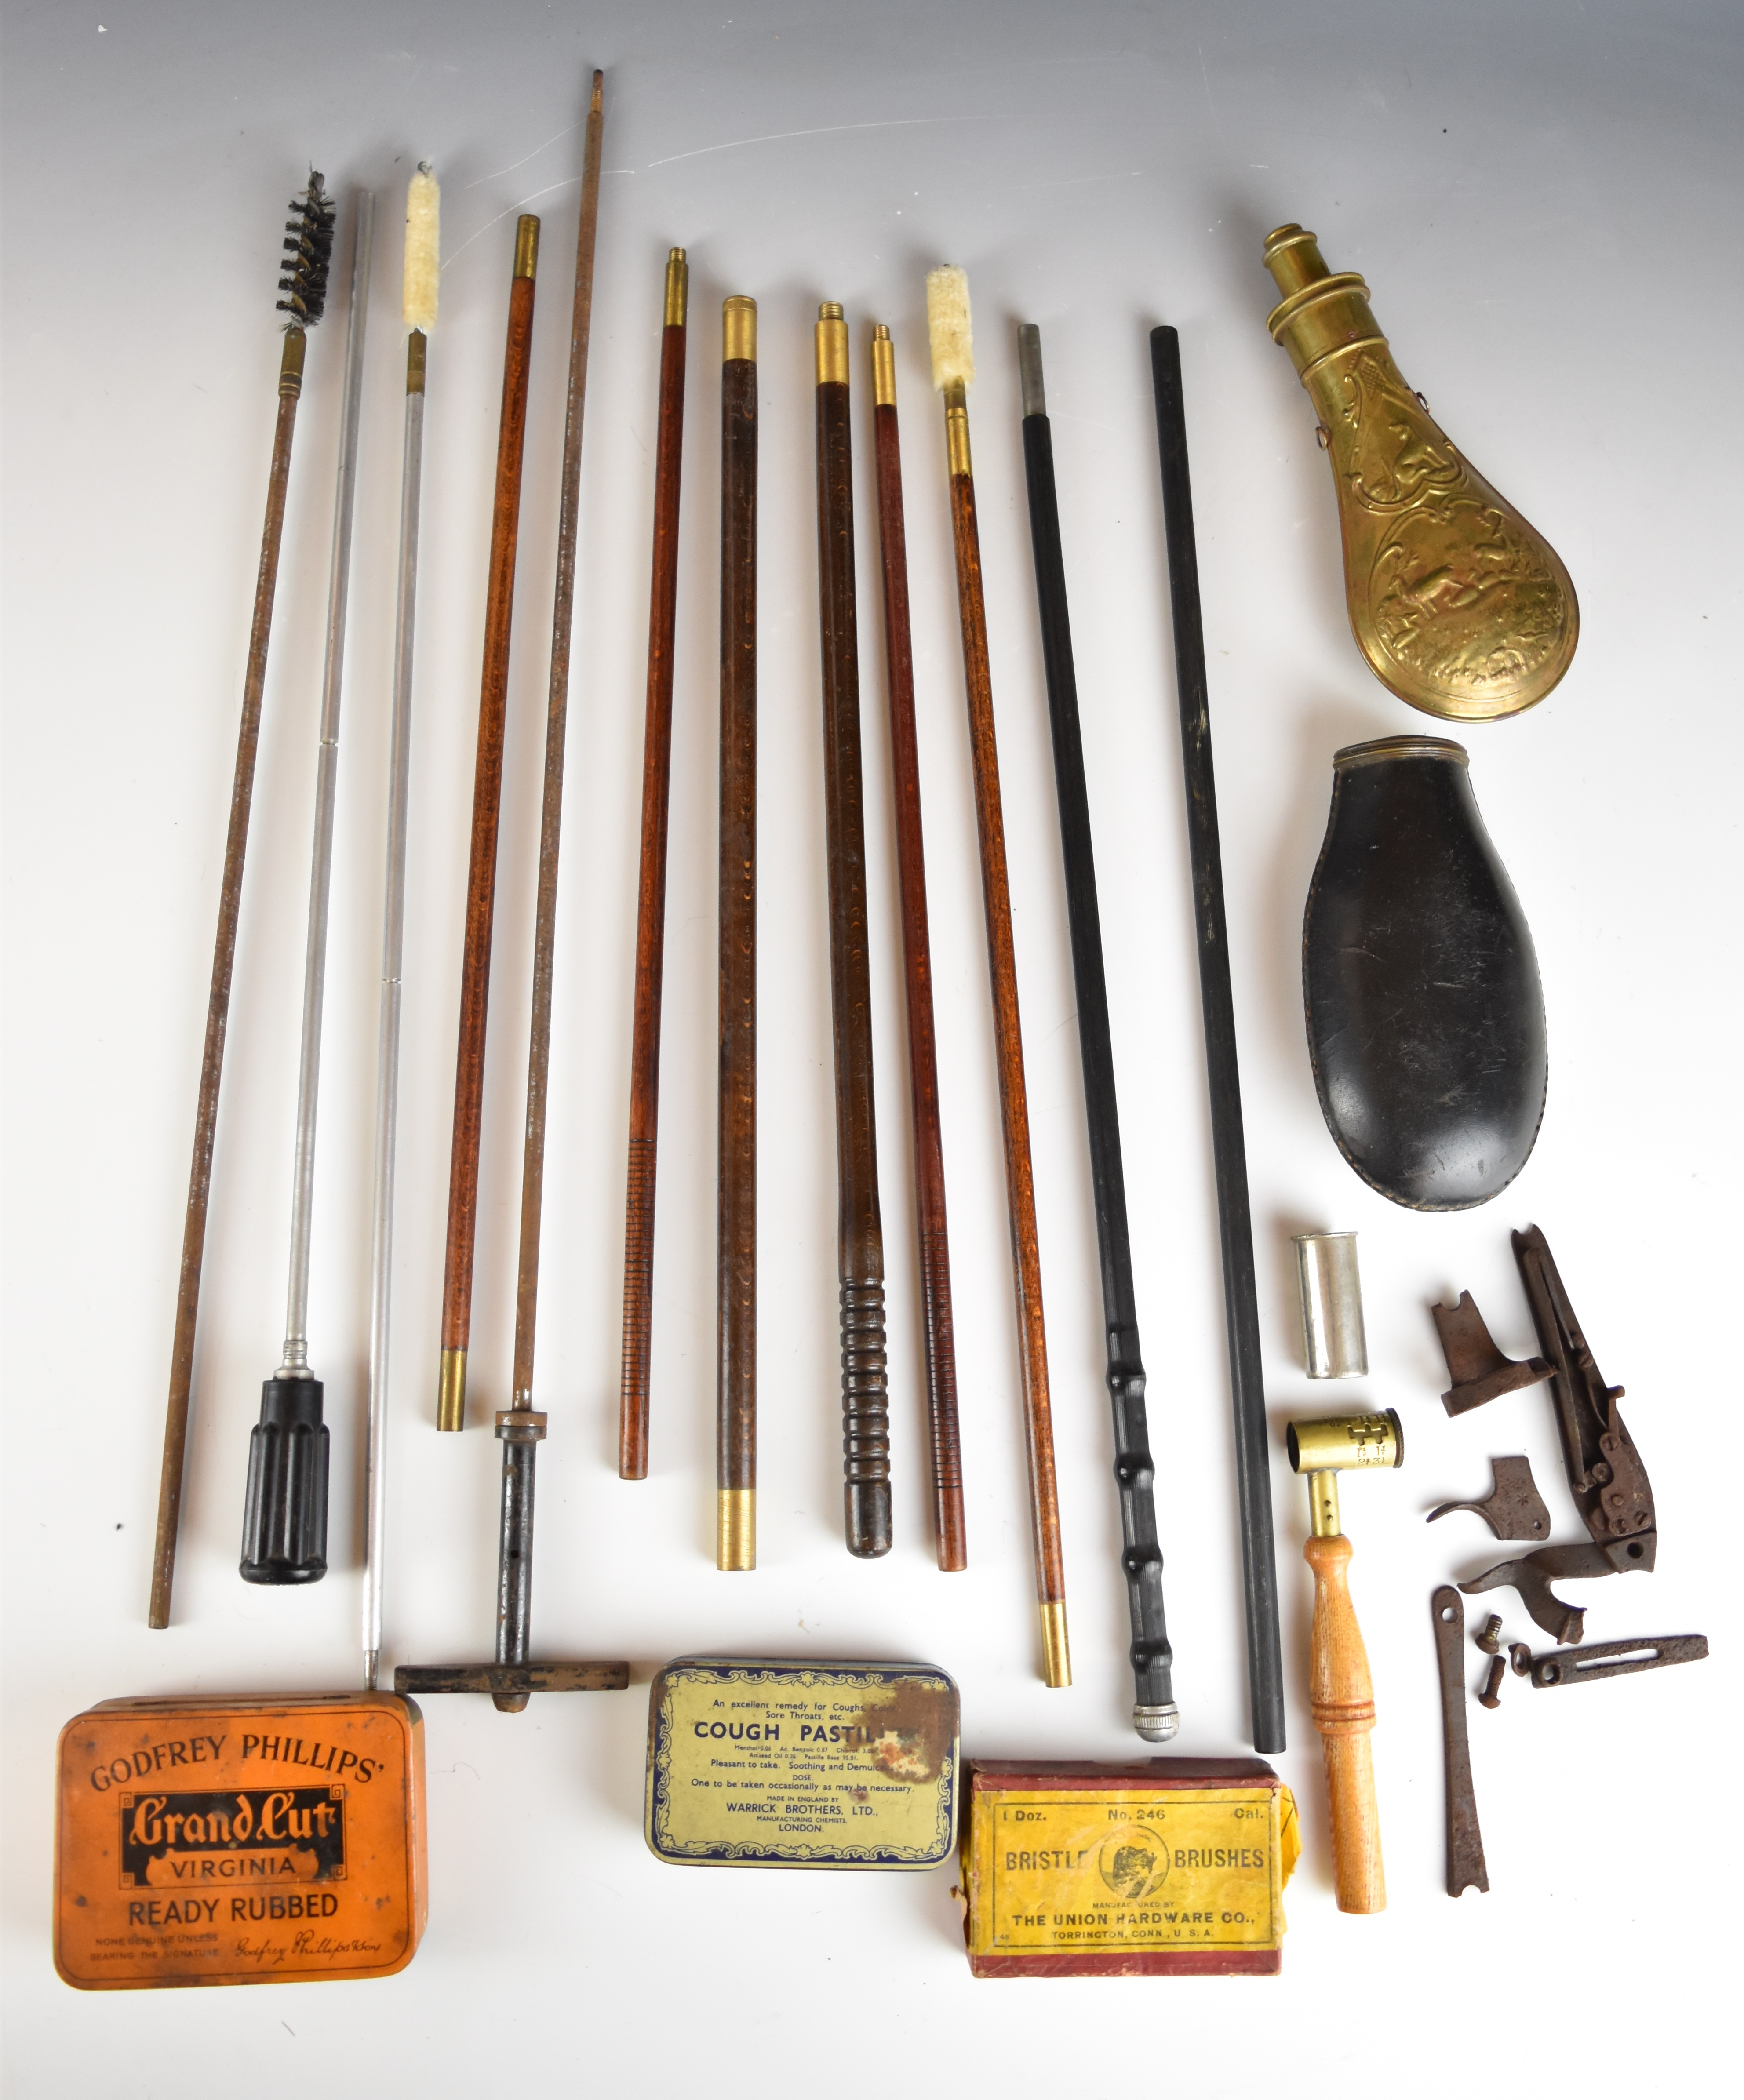 A collection of shotgun or rifle accessories including cleaning rods, powder flasks, gun locks etc.